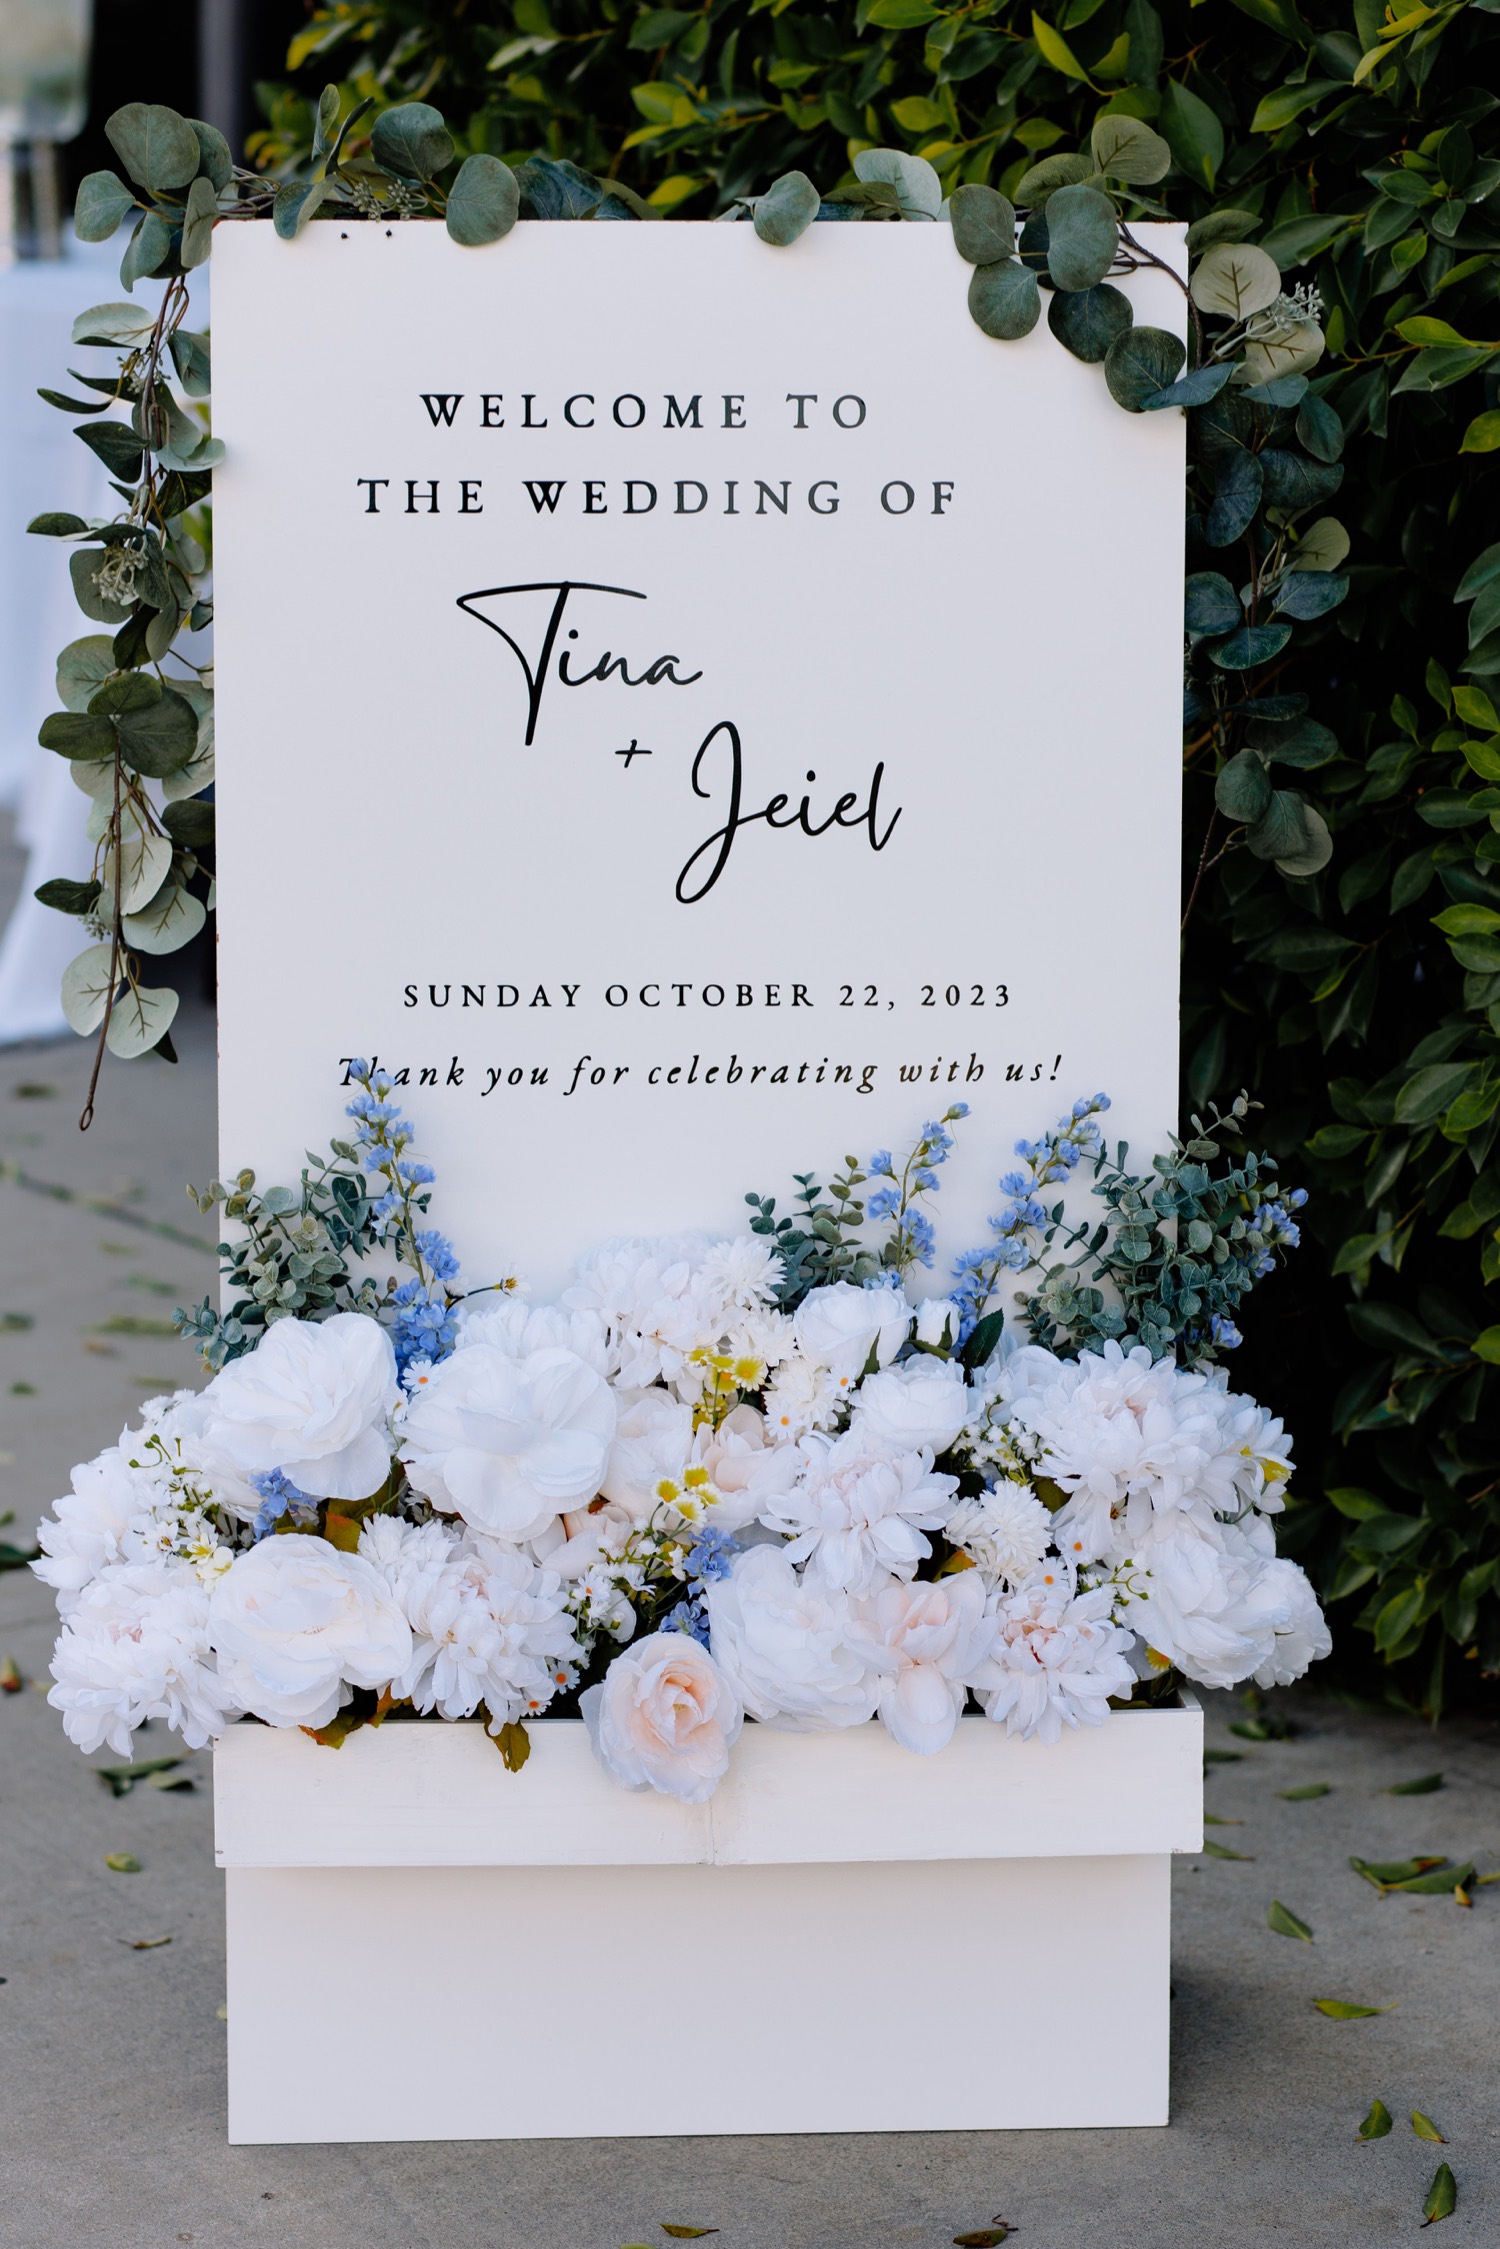 spring outdoor garden wedding photographed by Magaly Barajas